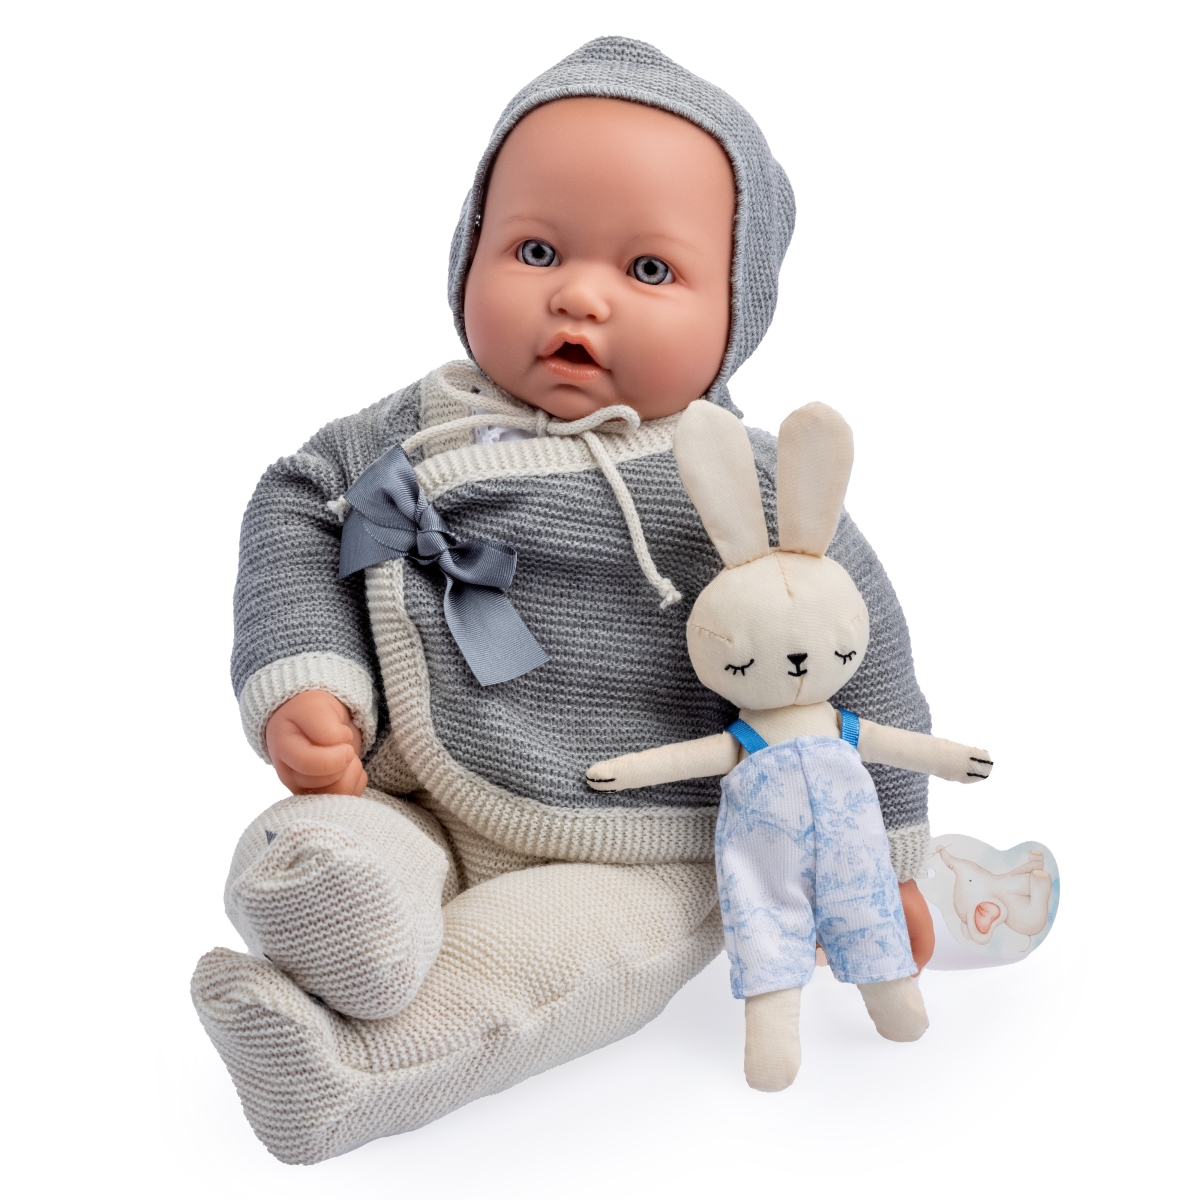 Picture of JC Toys 15201 La Baby Soft Body Weighted Doll Outfit with Accessories, Gray - 17 in.